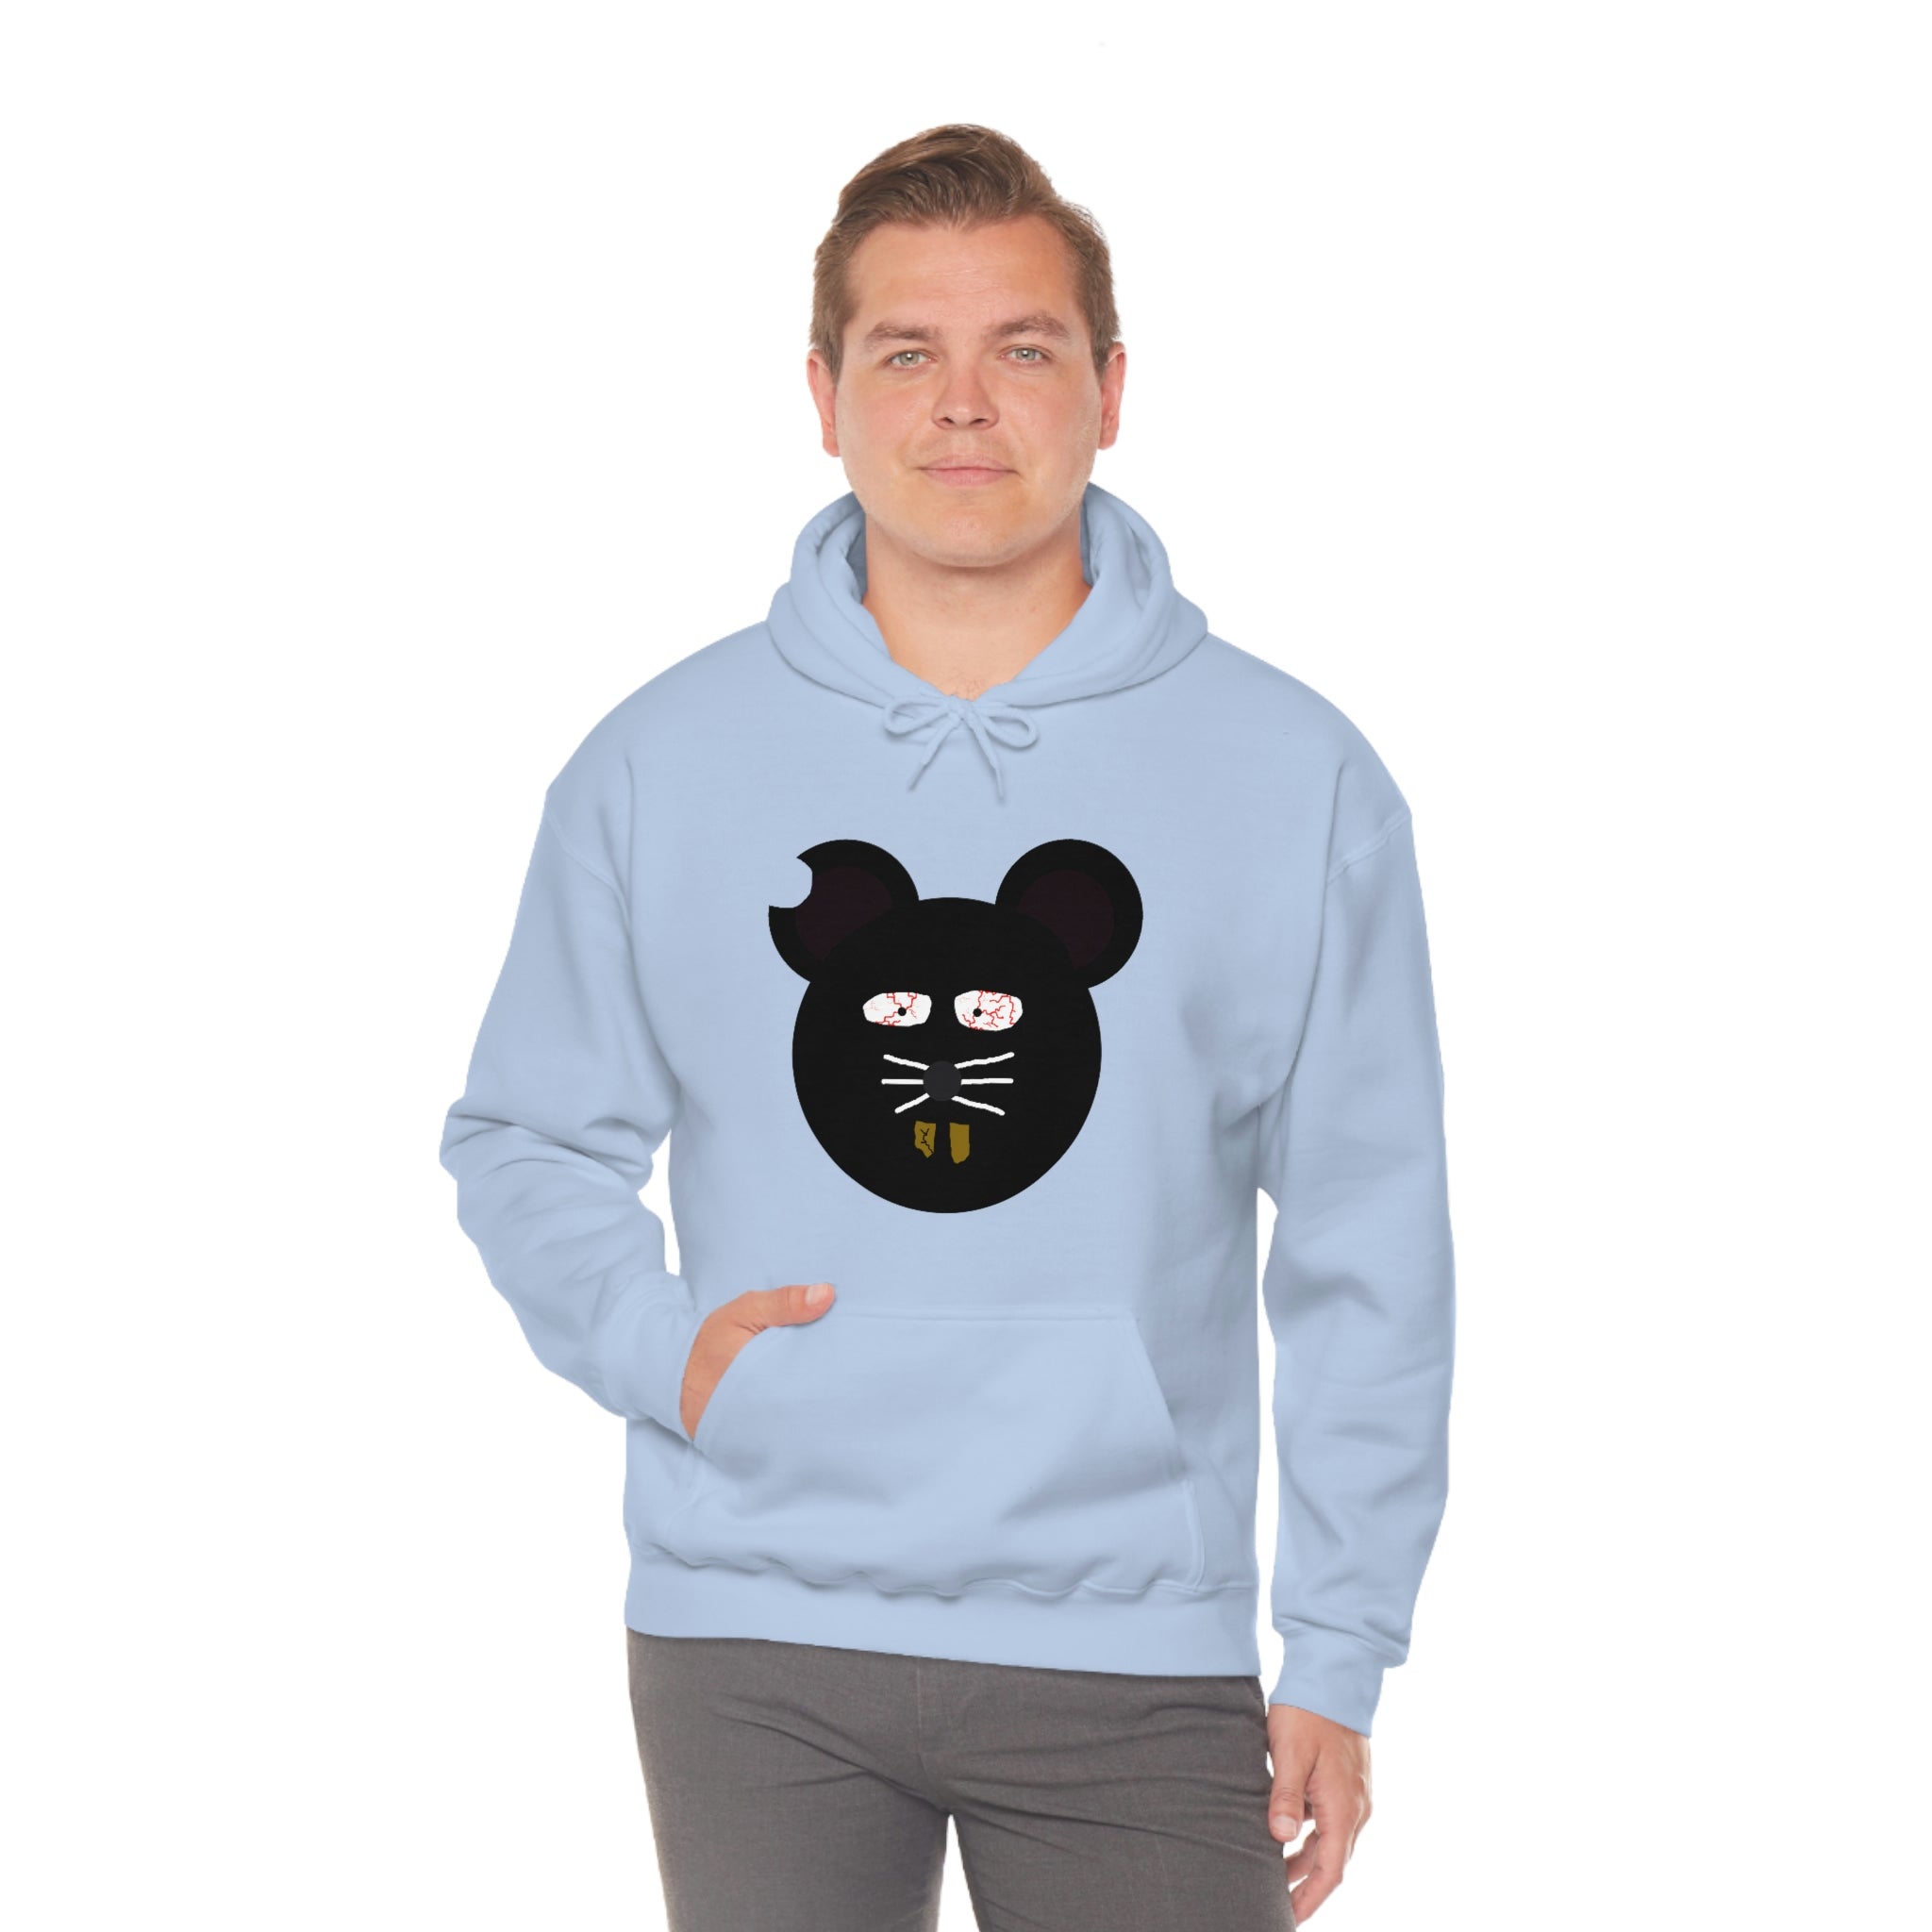 Cracked Out Mouse Hoodie